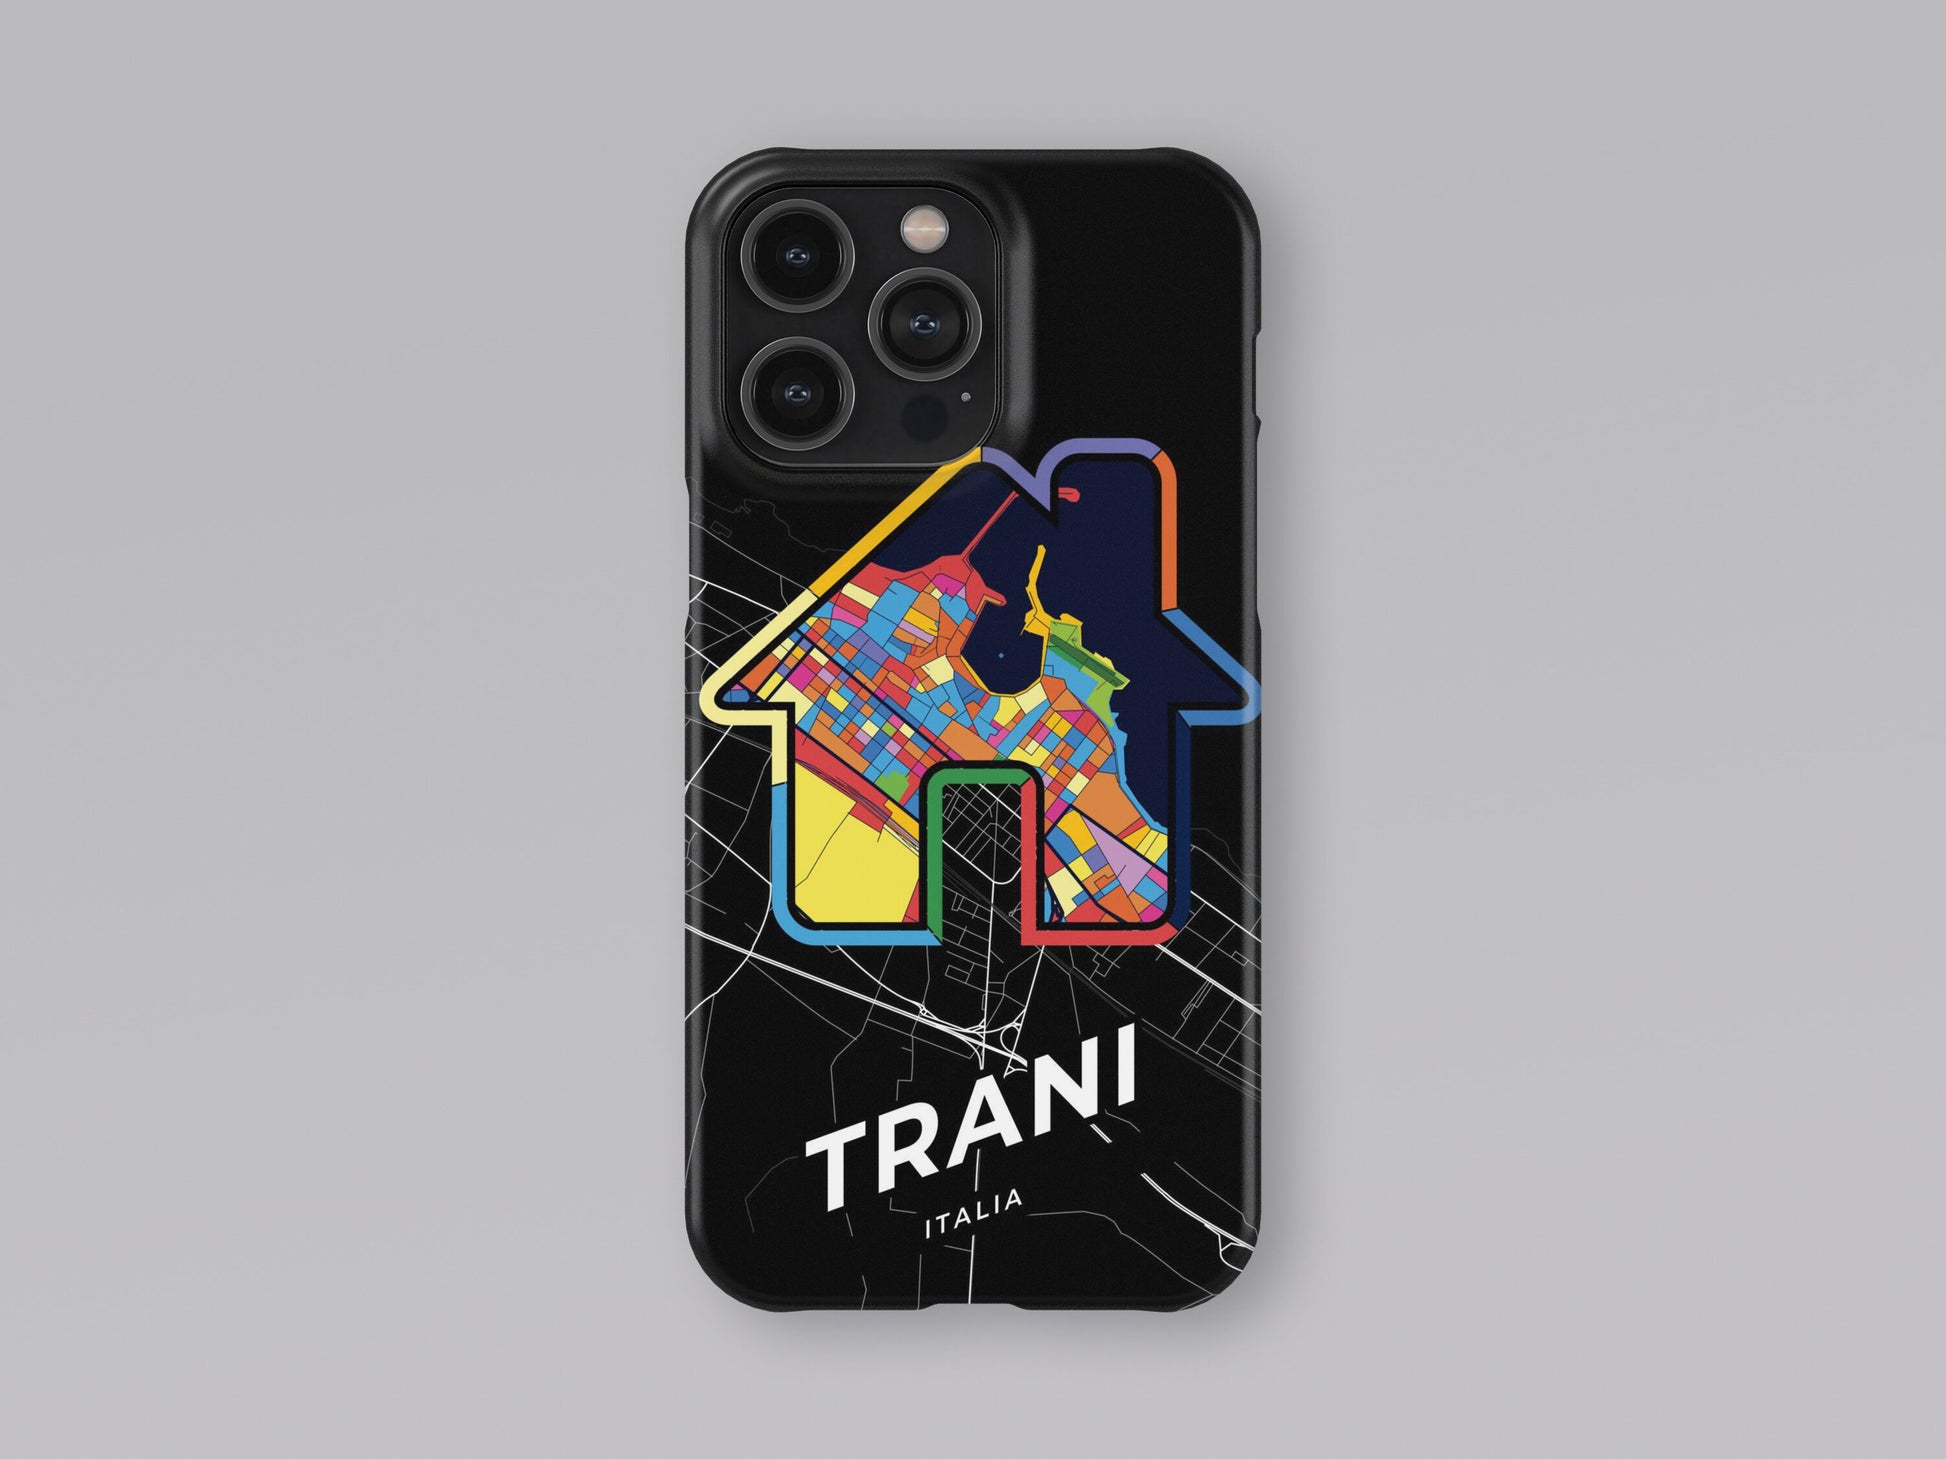 Trani Italy slim phone case with colorful icon 3